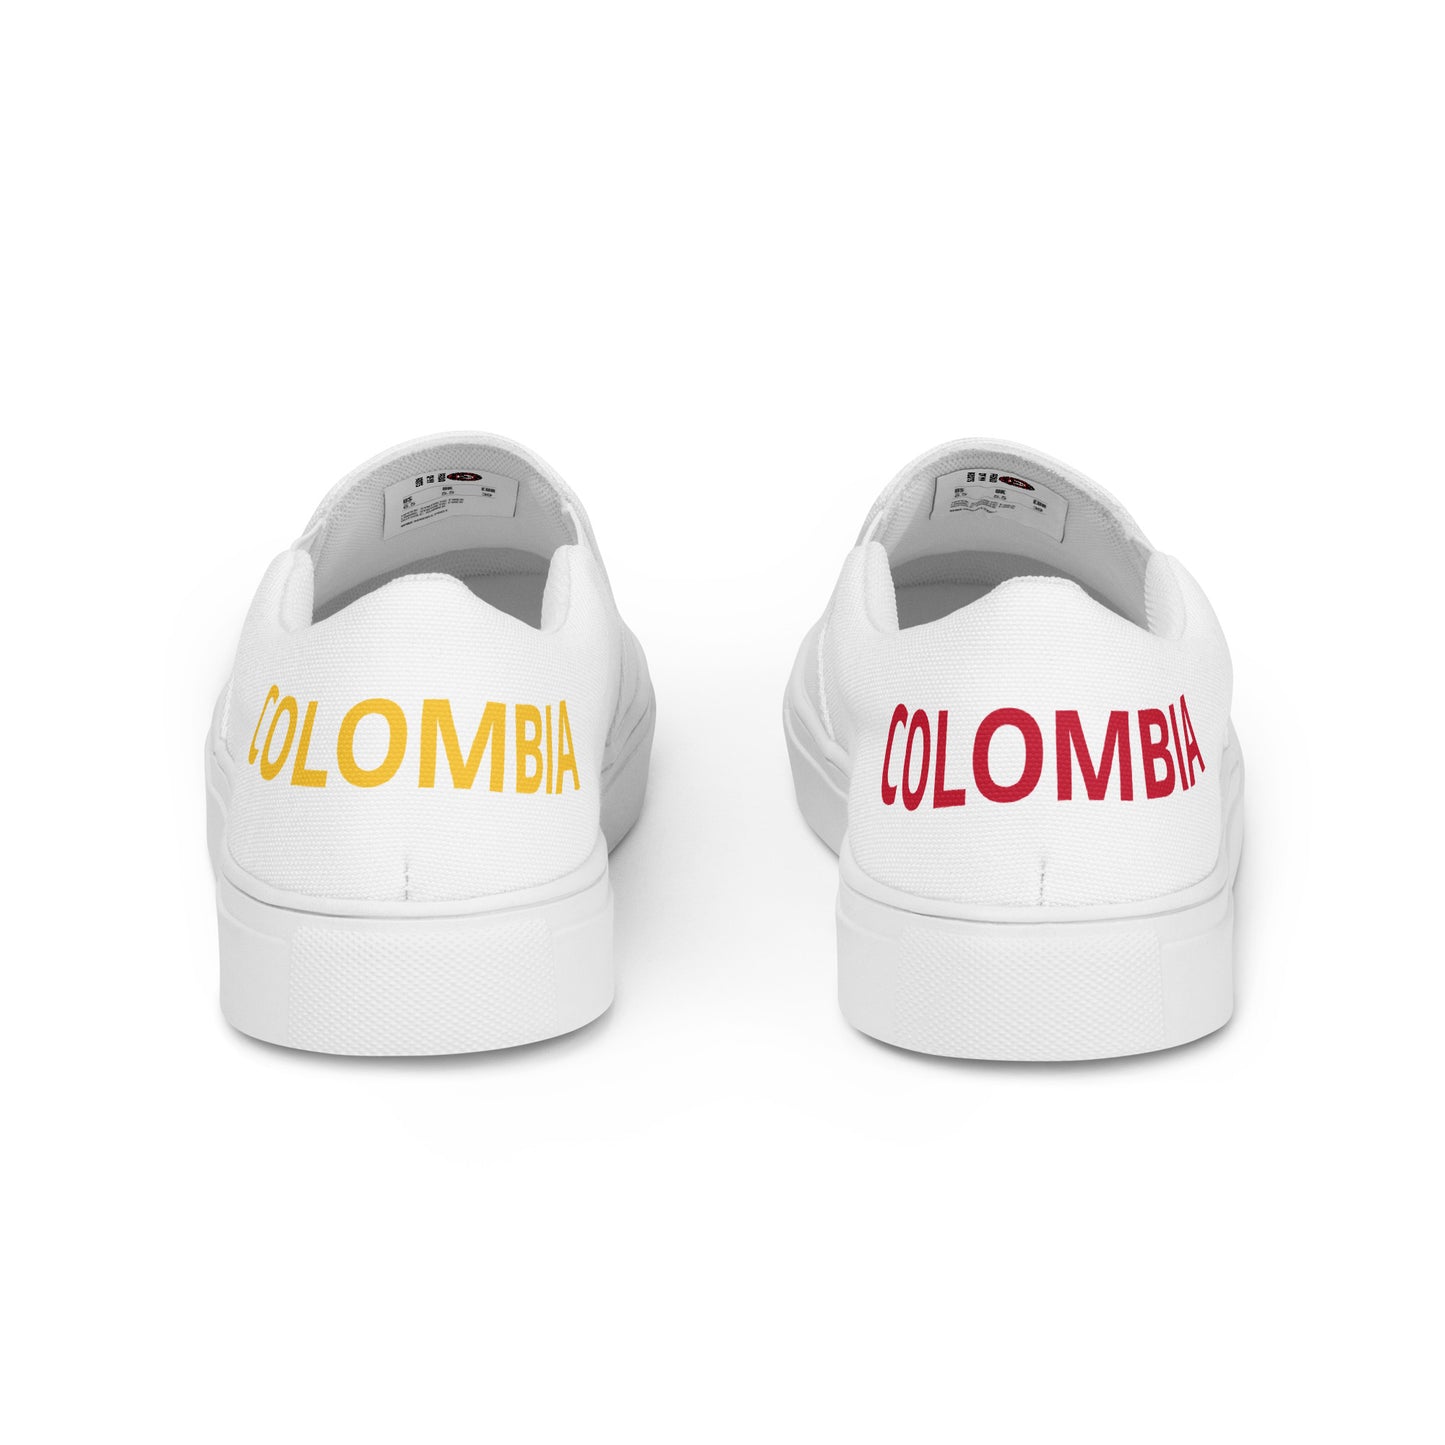 Colombia - Women - White - Slip-on shoes